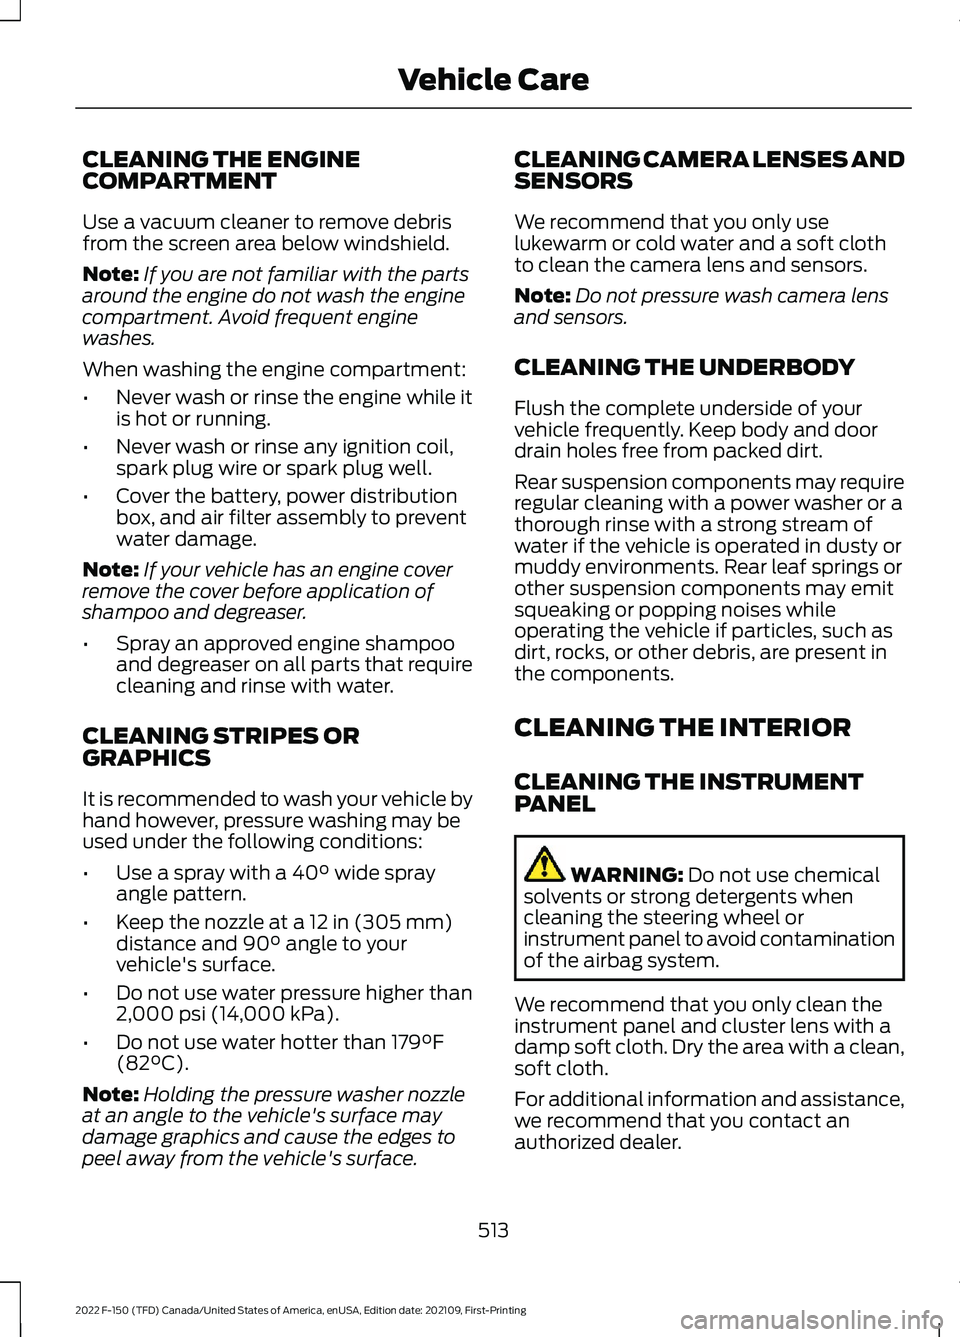 FORD F-150 2022  Owners Manual CLEANING THE ENGINE
COMPARTMENT
Use a vacuum cleaner to remove debris
from the screen area below windshield.
Note:
If you are not familiar with the parts
around the engine do not wash the engine
compa